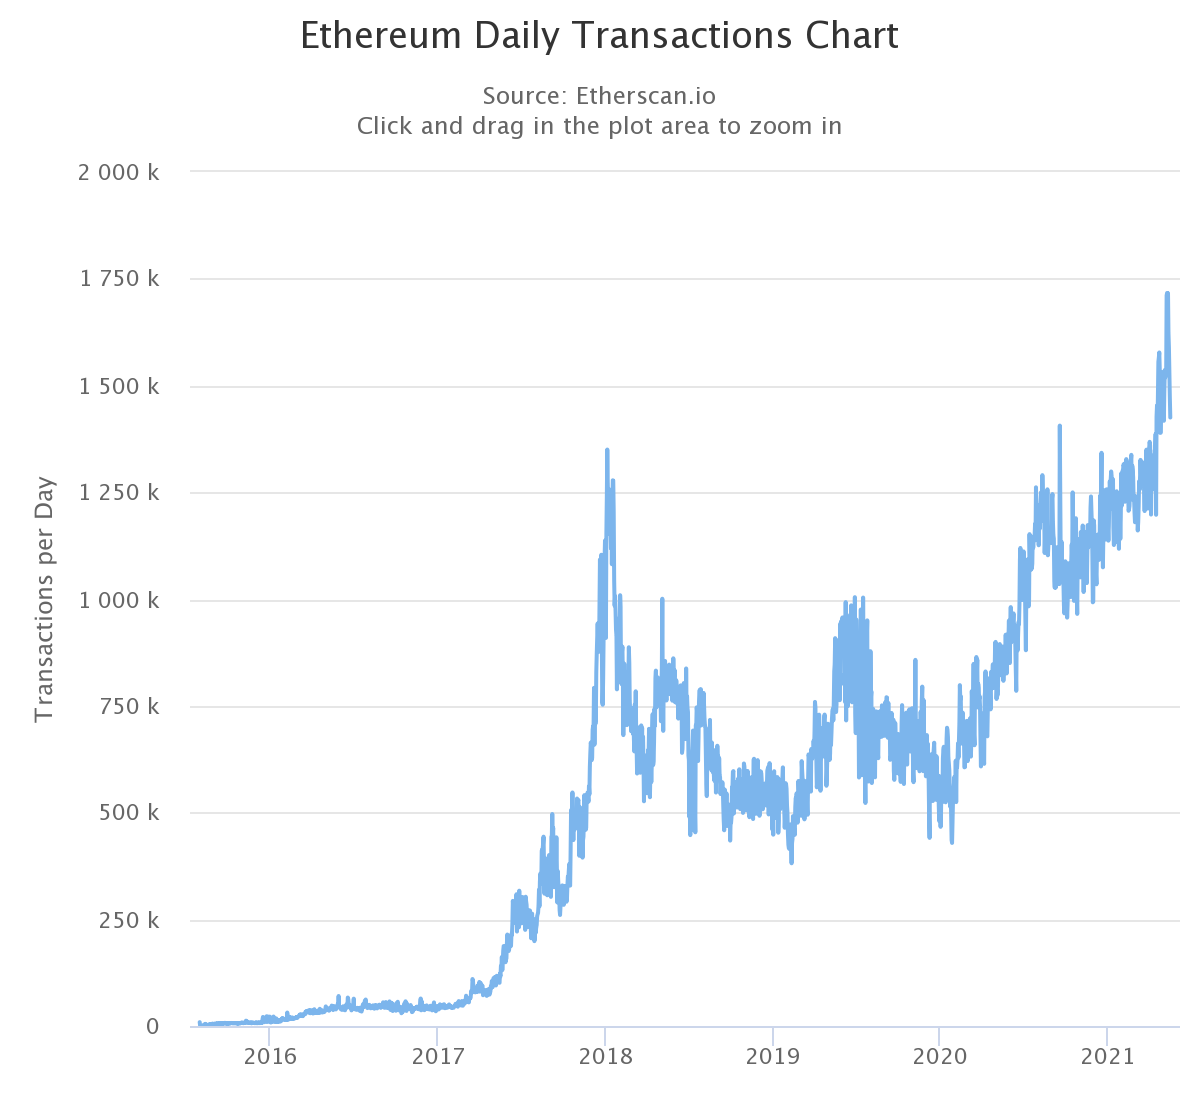 BTC and ETH Transaction Fees Down 80%